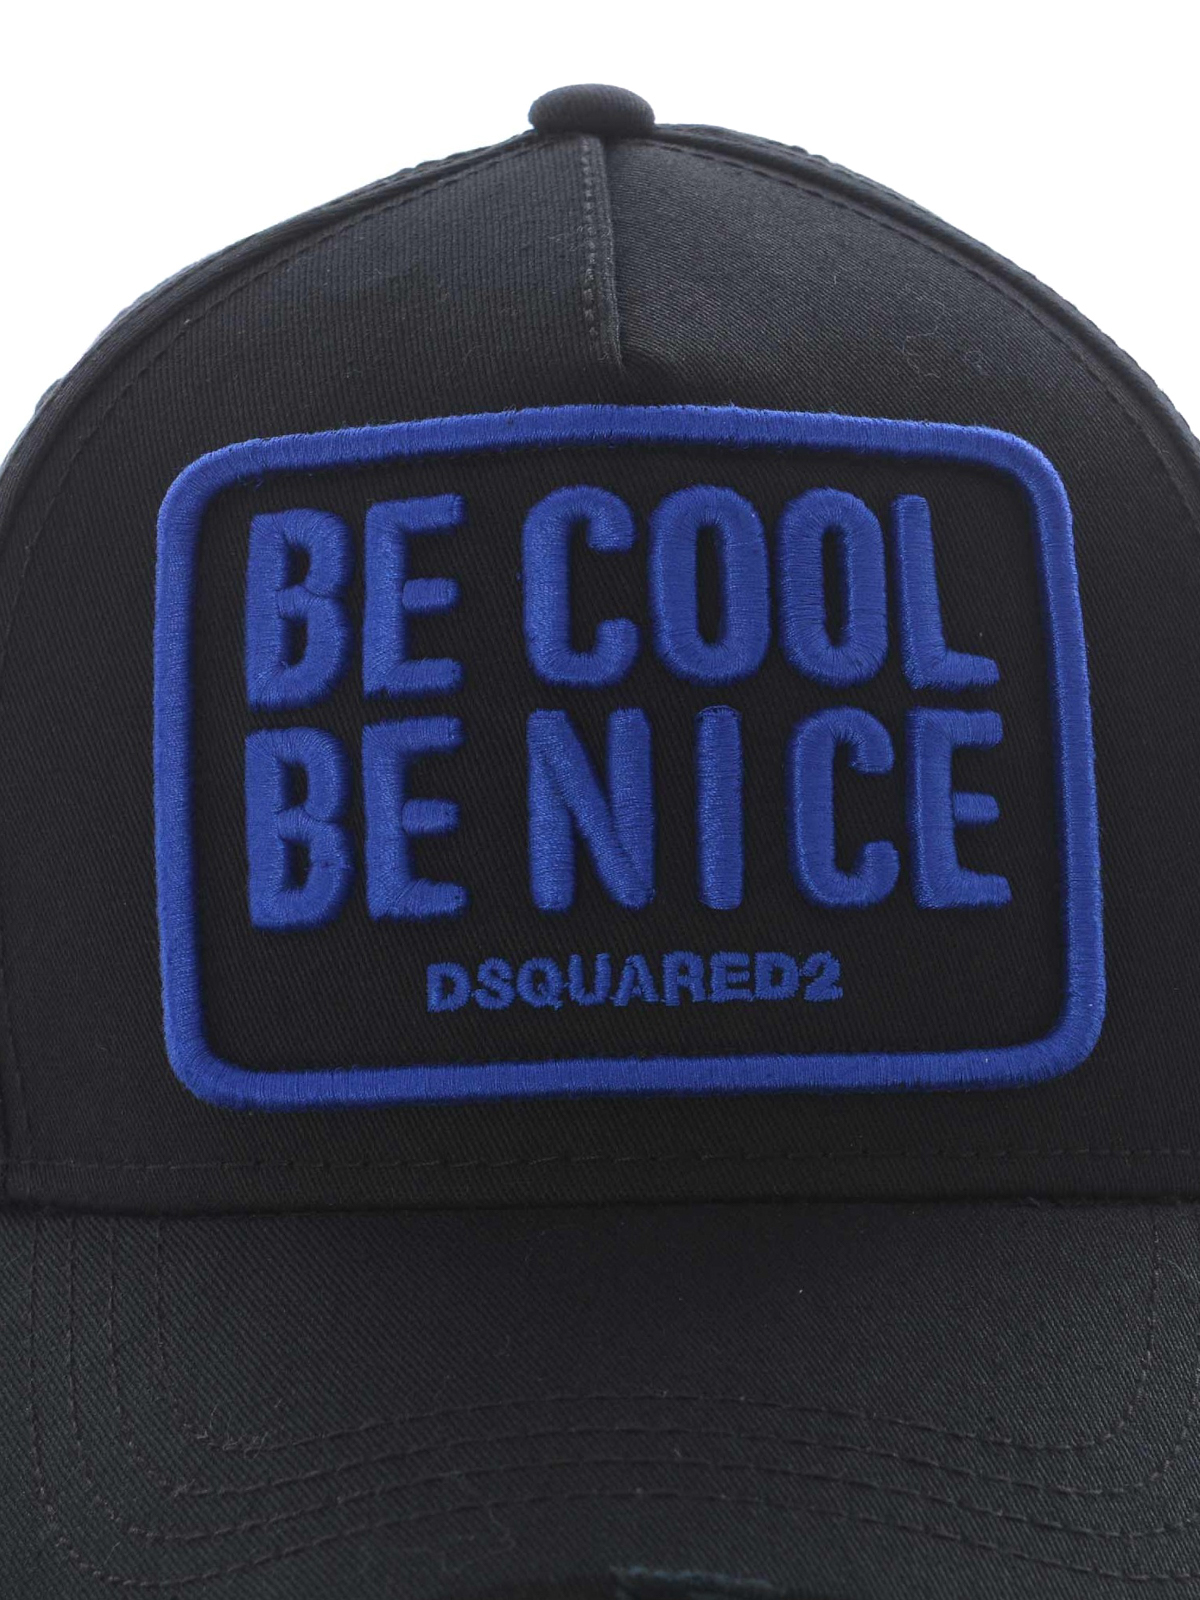 dsquared2 be cool be nice cap